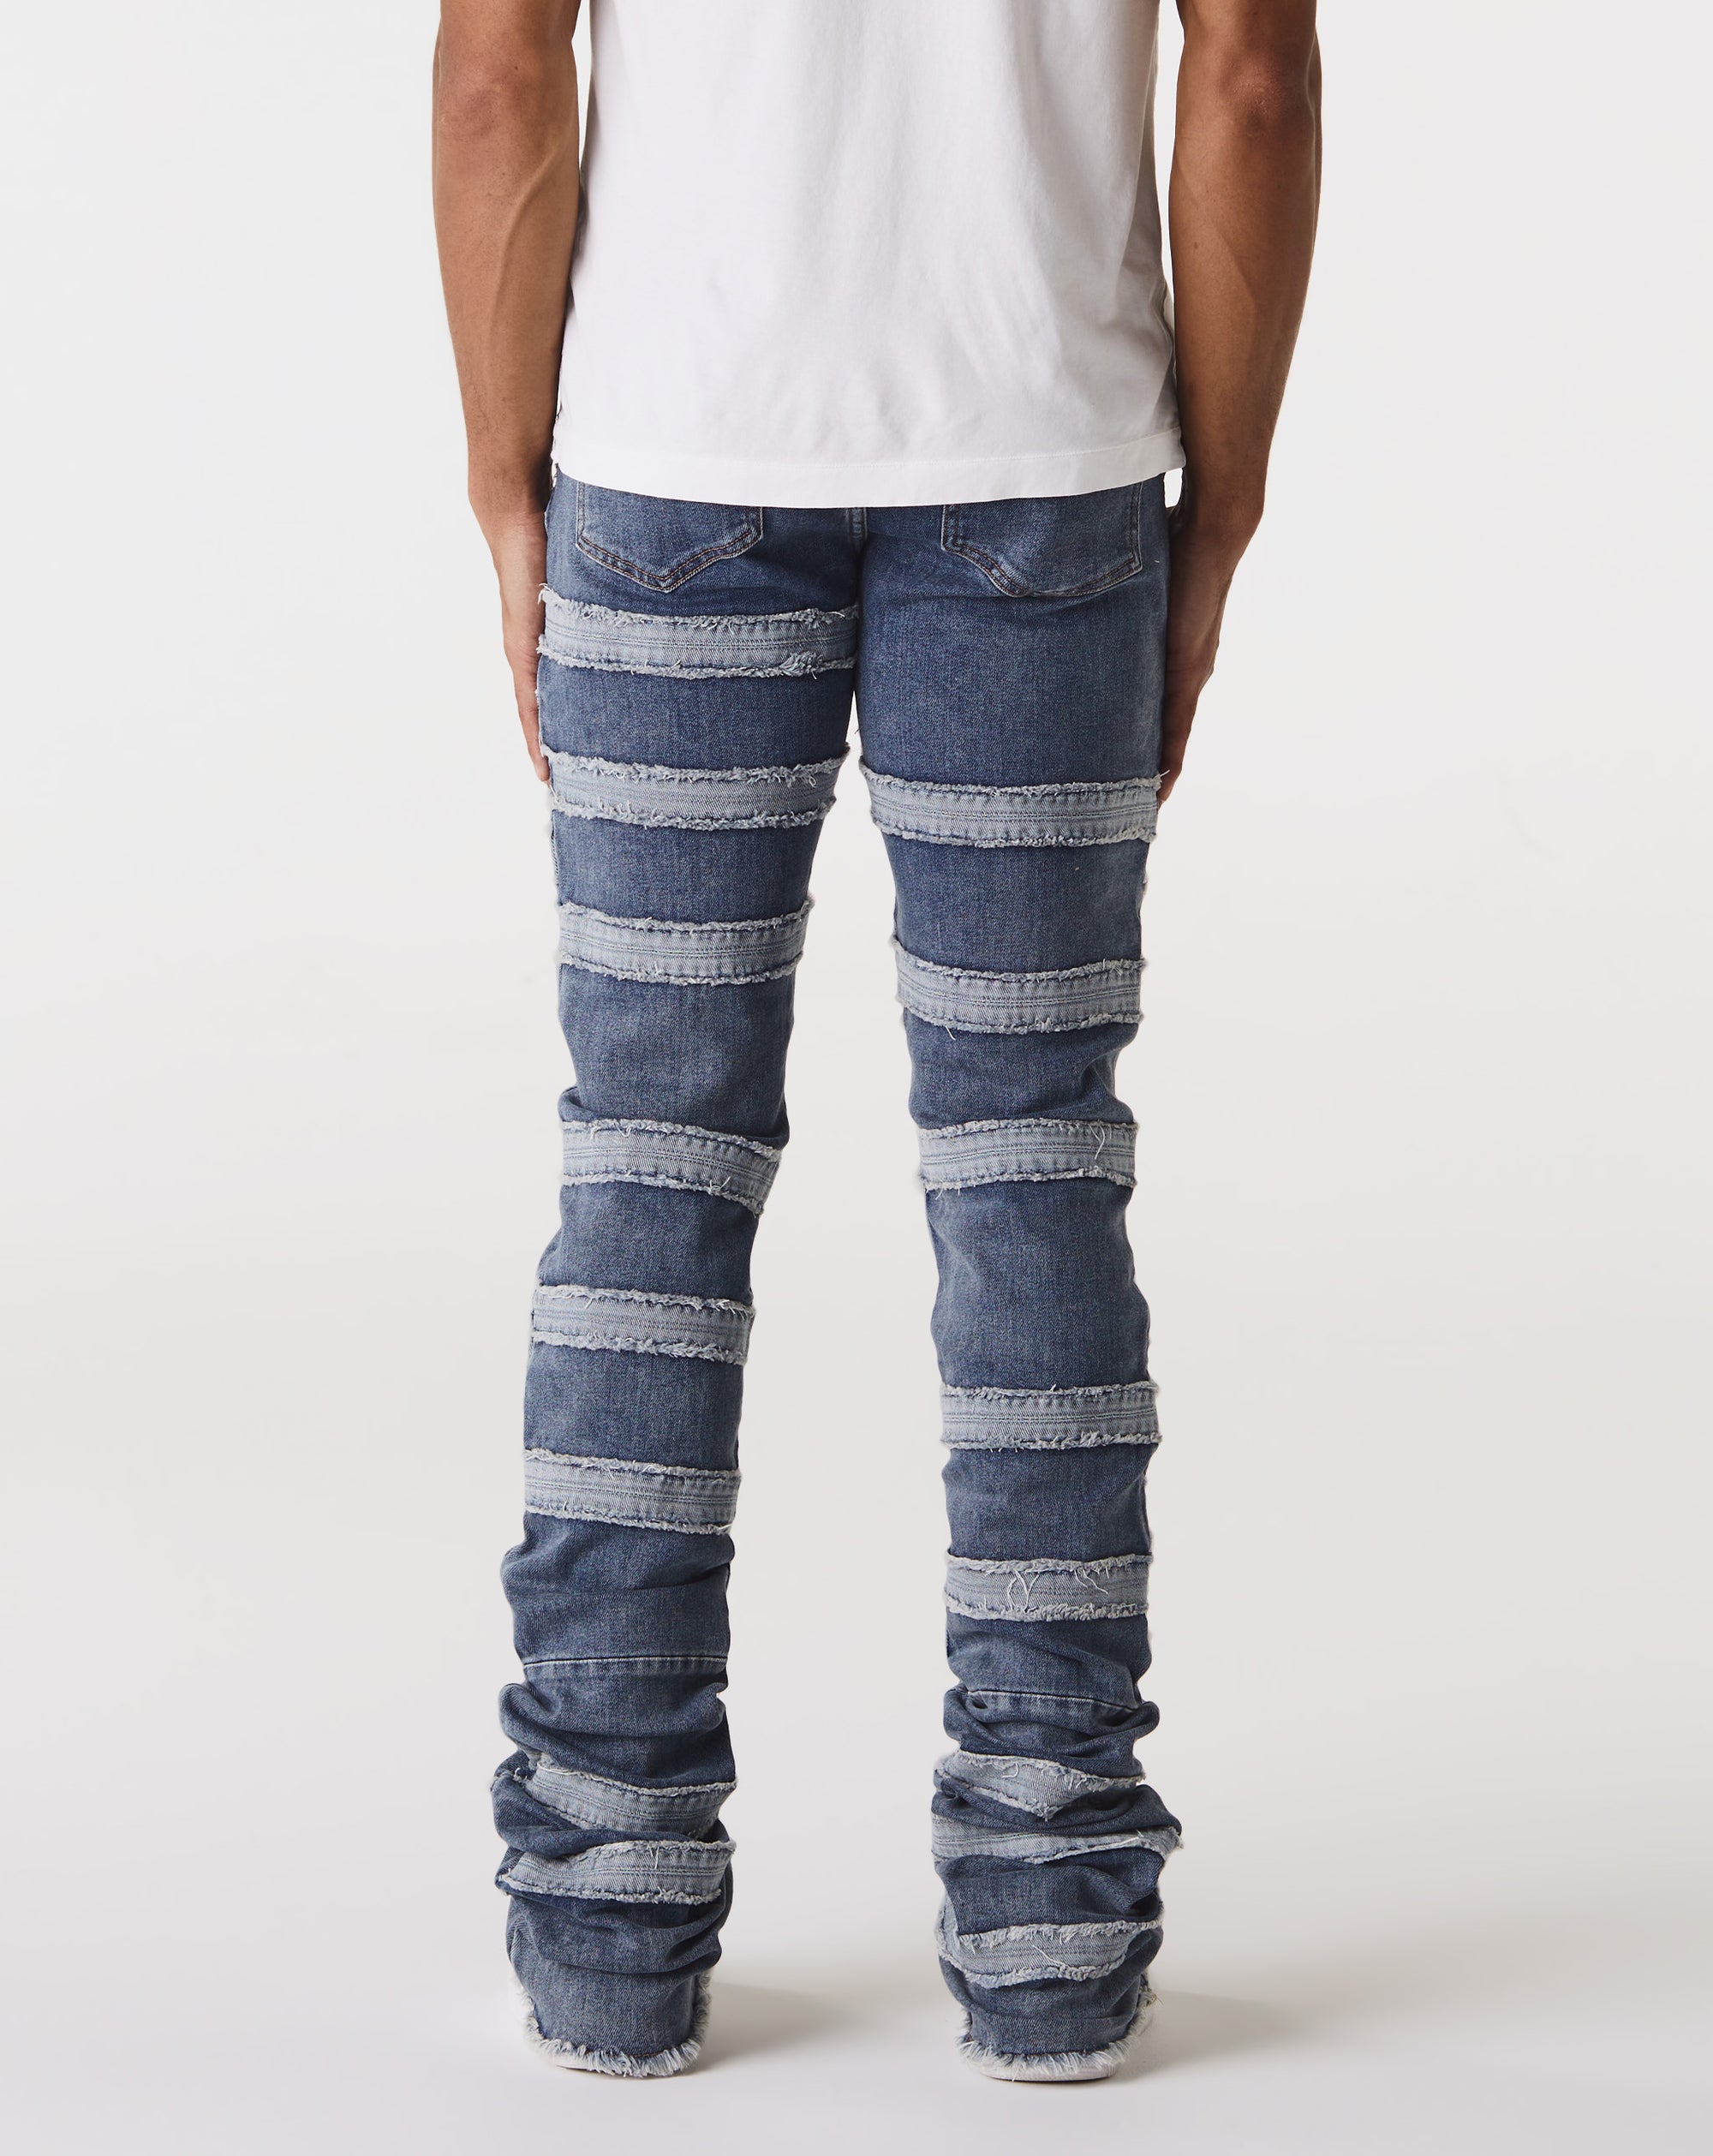 Doctrine Kill Joy Stacked Jeans - Rule of Next Apparel